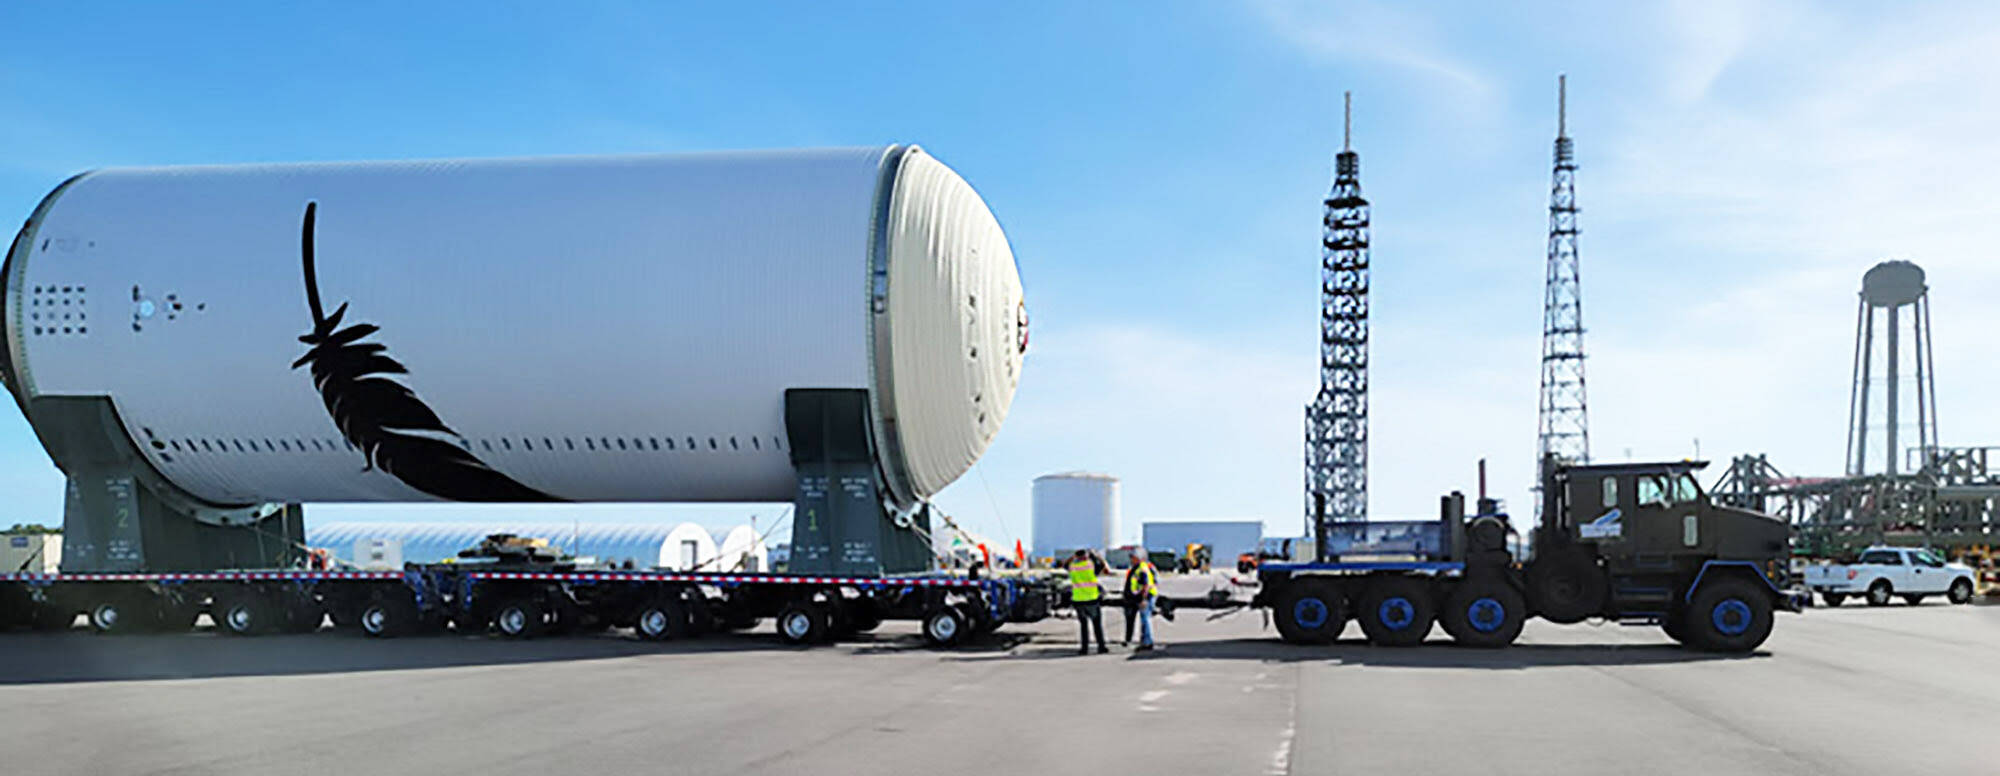 Kent-based Blue Origin’s New Glenn’s second stage tank is transported on site at Launch Complex 36 in Cape Canaveral, Florida. COURTESY PHOTO, Blue Origin